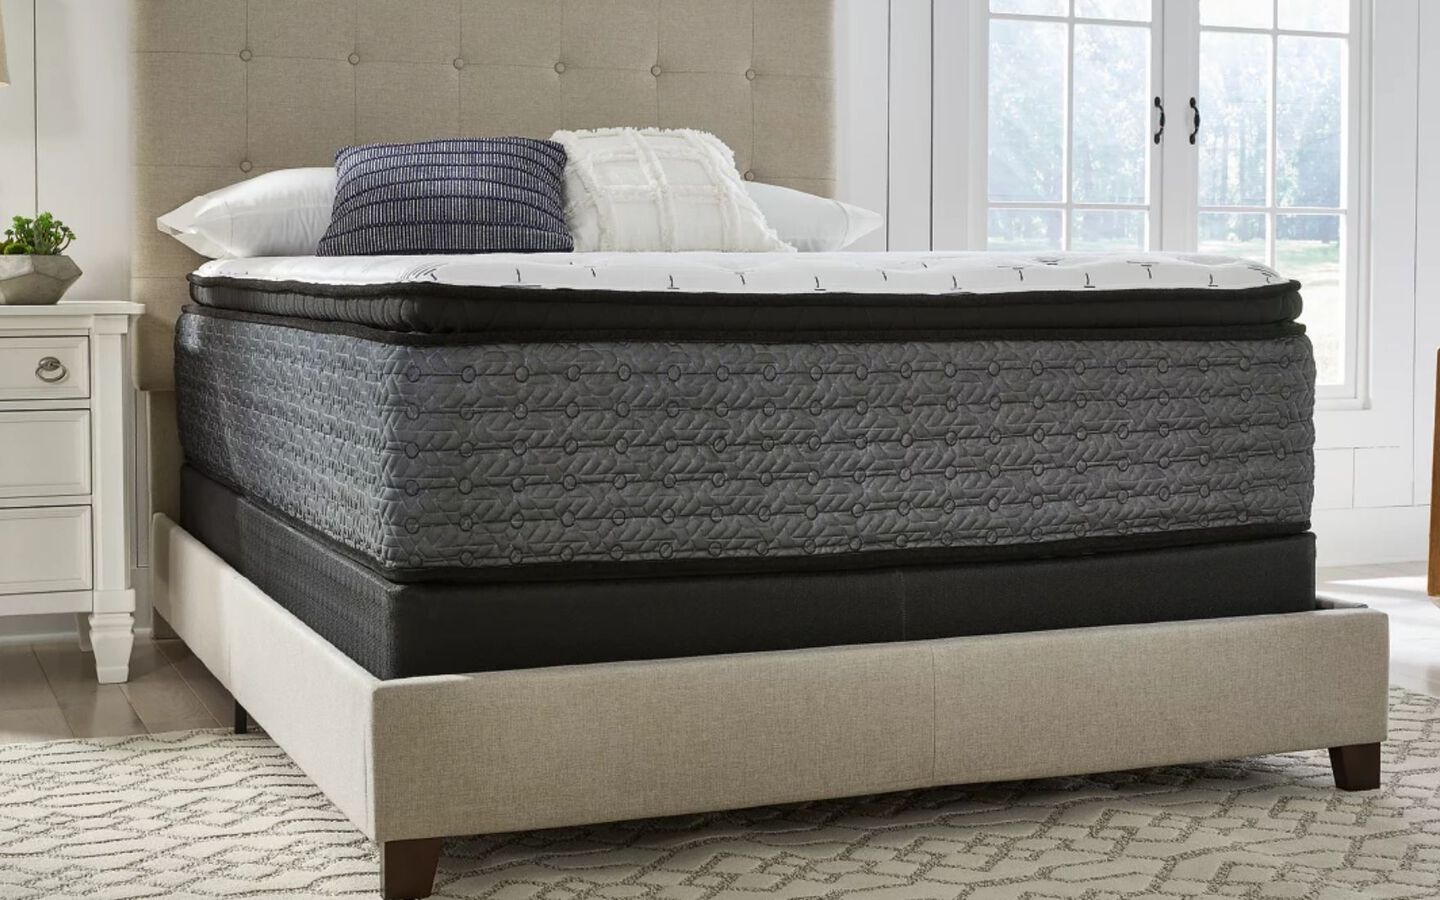 Close up image of the bottom edge of a grey mattress on a beige bedframe